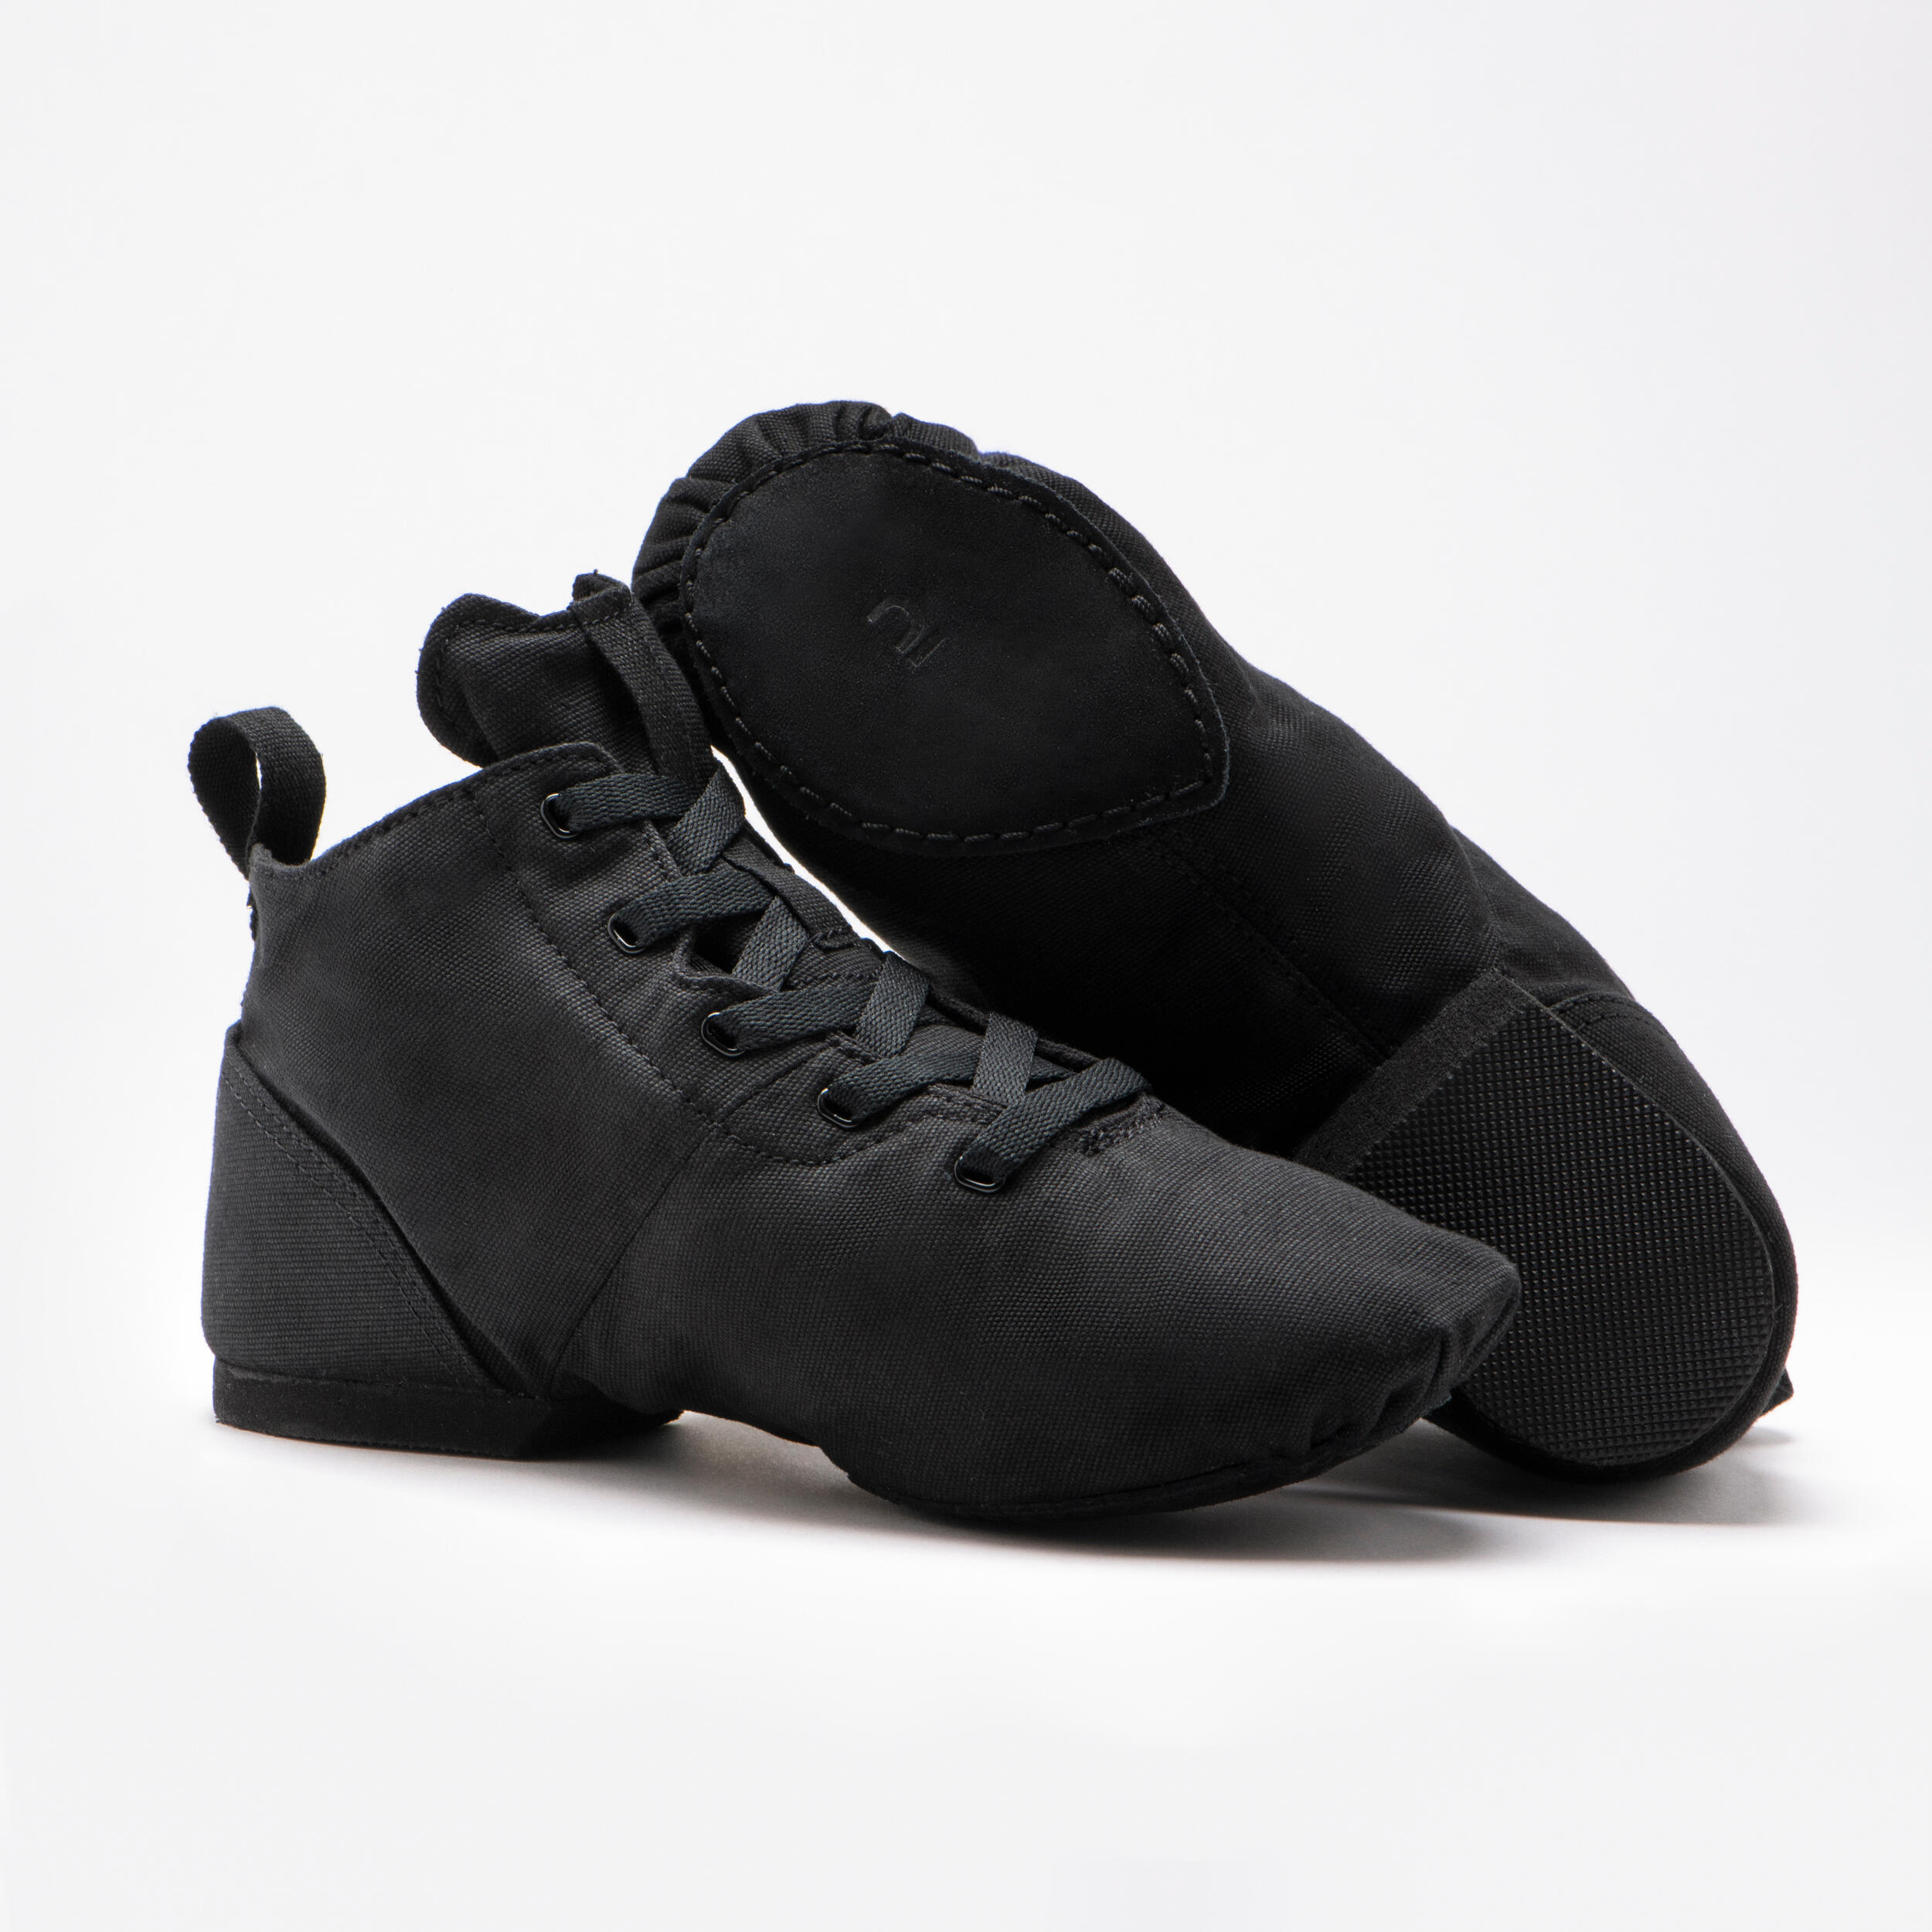 Canvas Modern Jazz Dance Ankle Boots - Slippers - Black - STAREVER